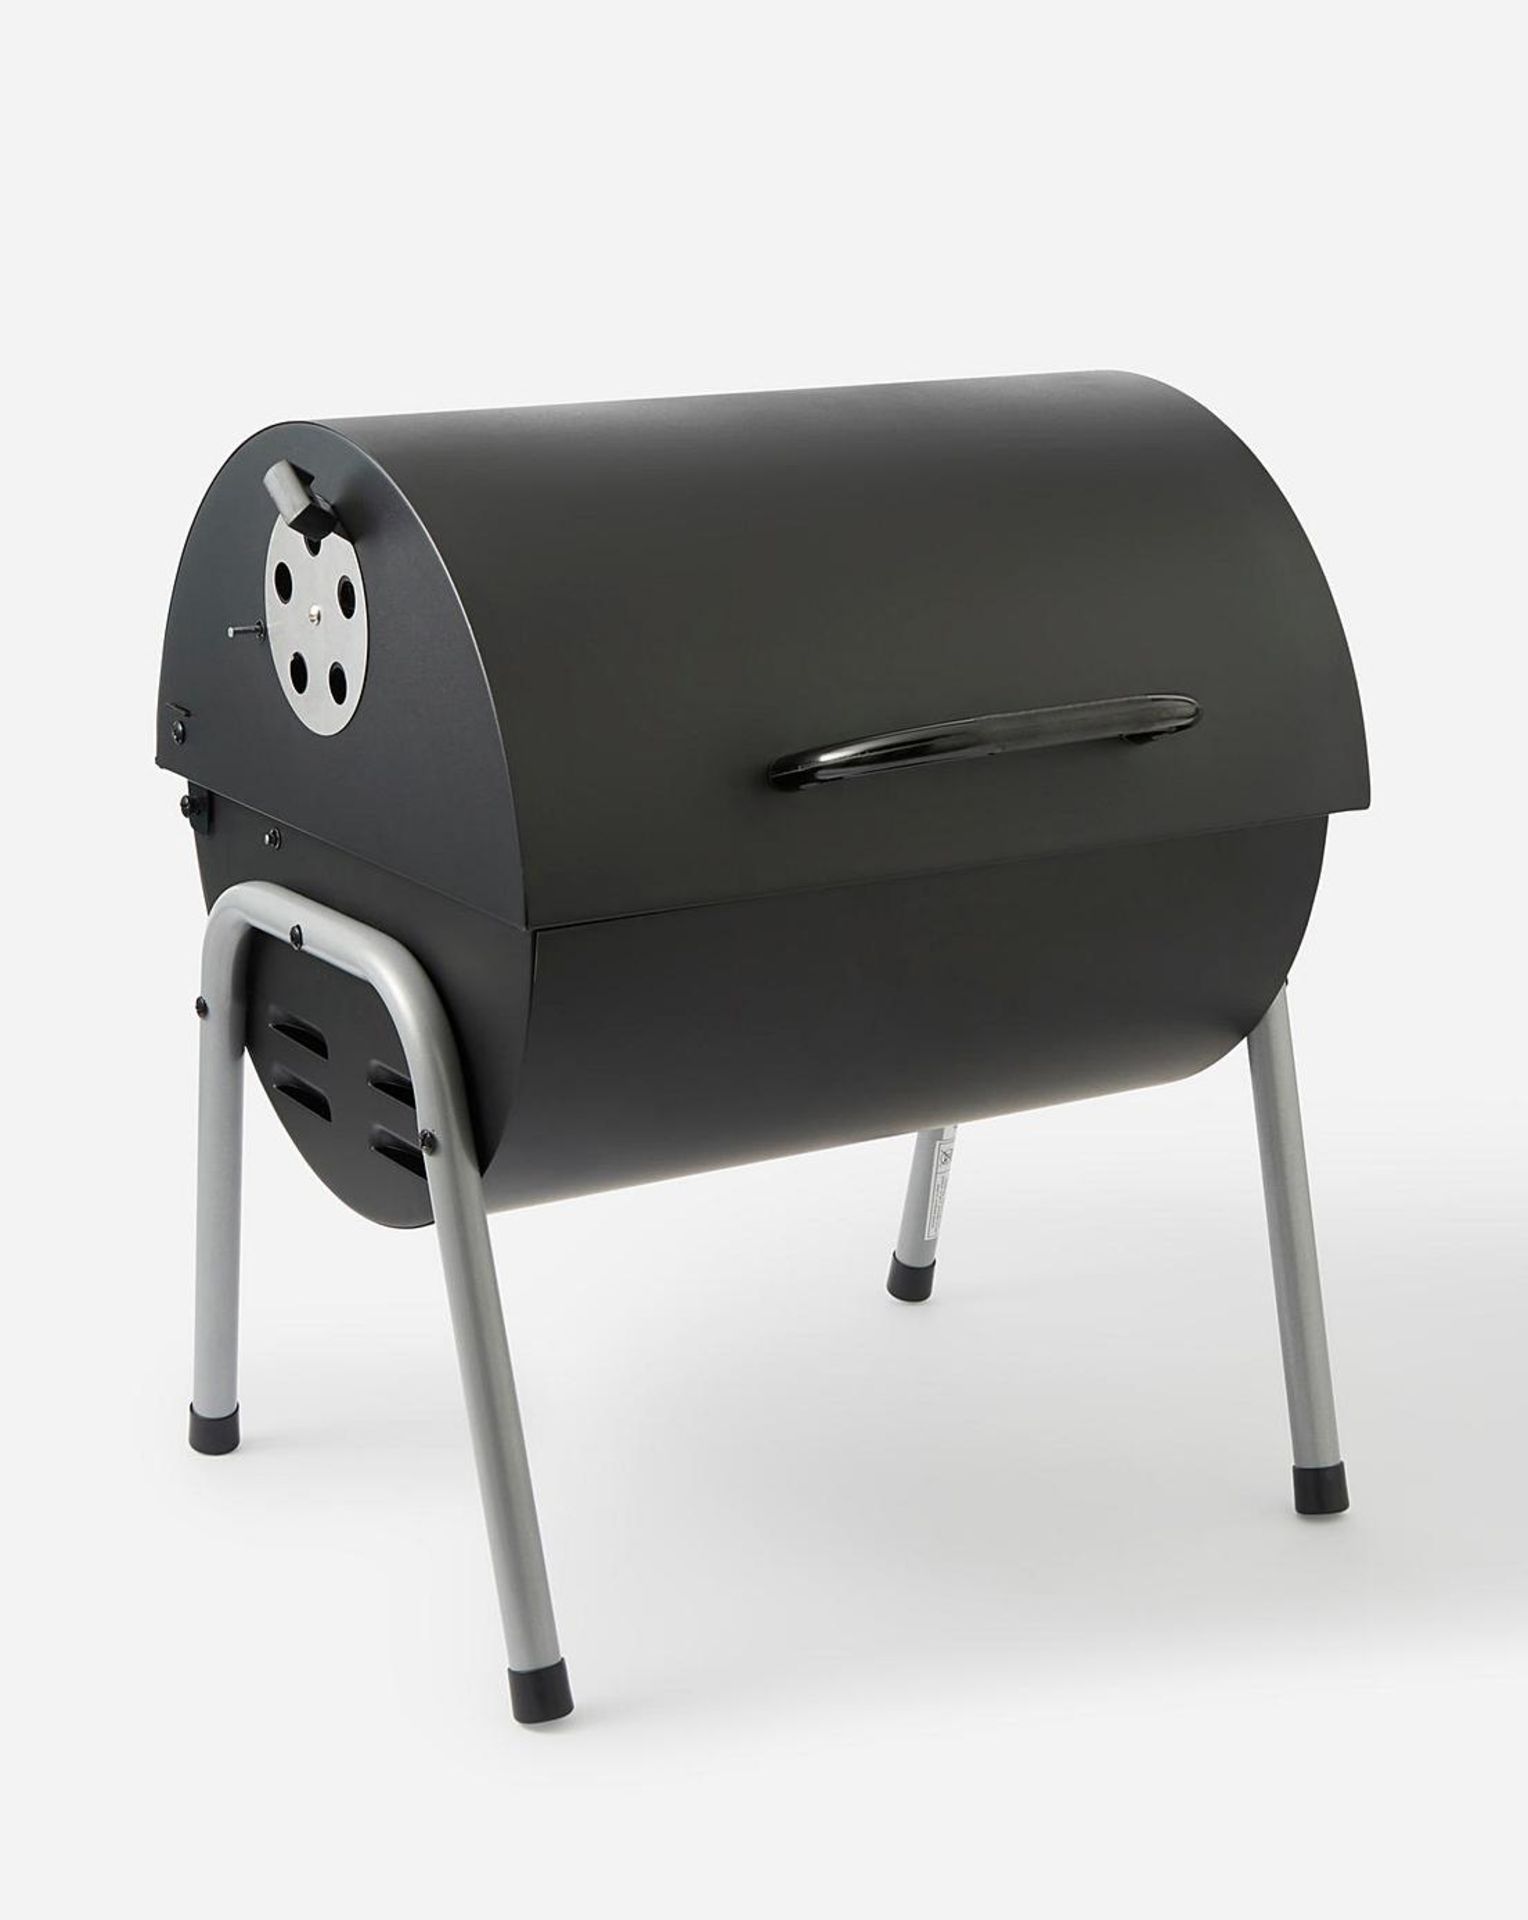 TRADE LOT 12x BRAND NEW Tabletop Oil Drum Barbeque Grill. RRP £59.99 EACH. Black steel firebowl with - Bild 3 aus 4